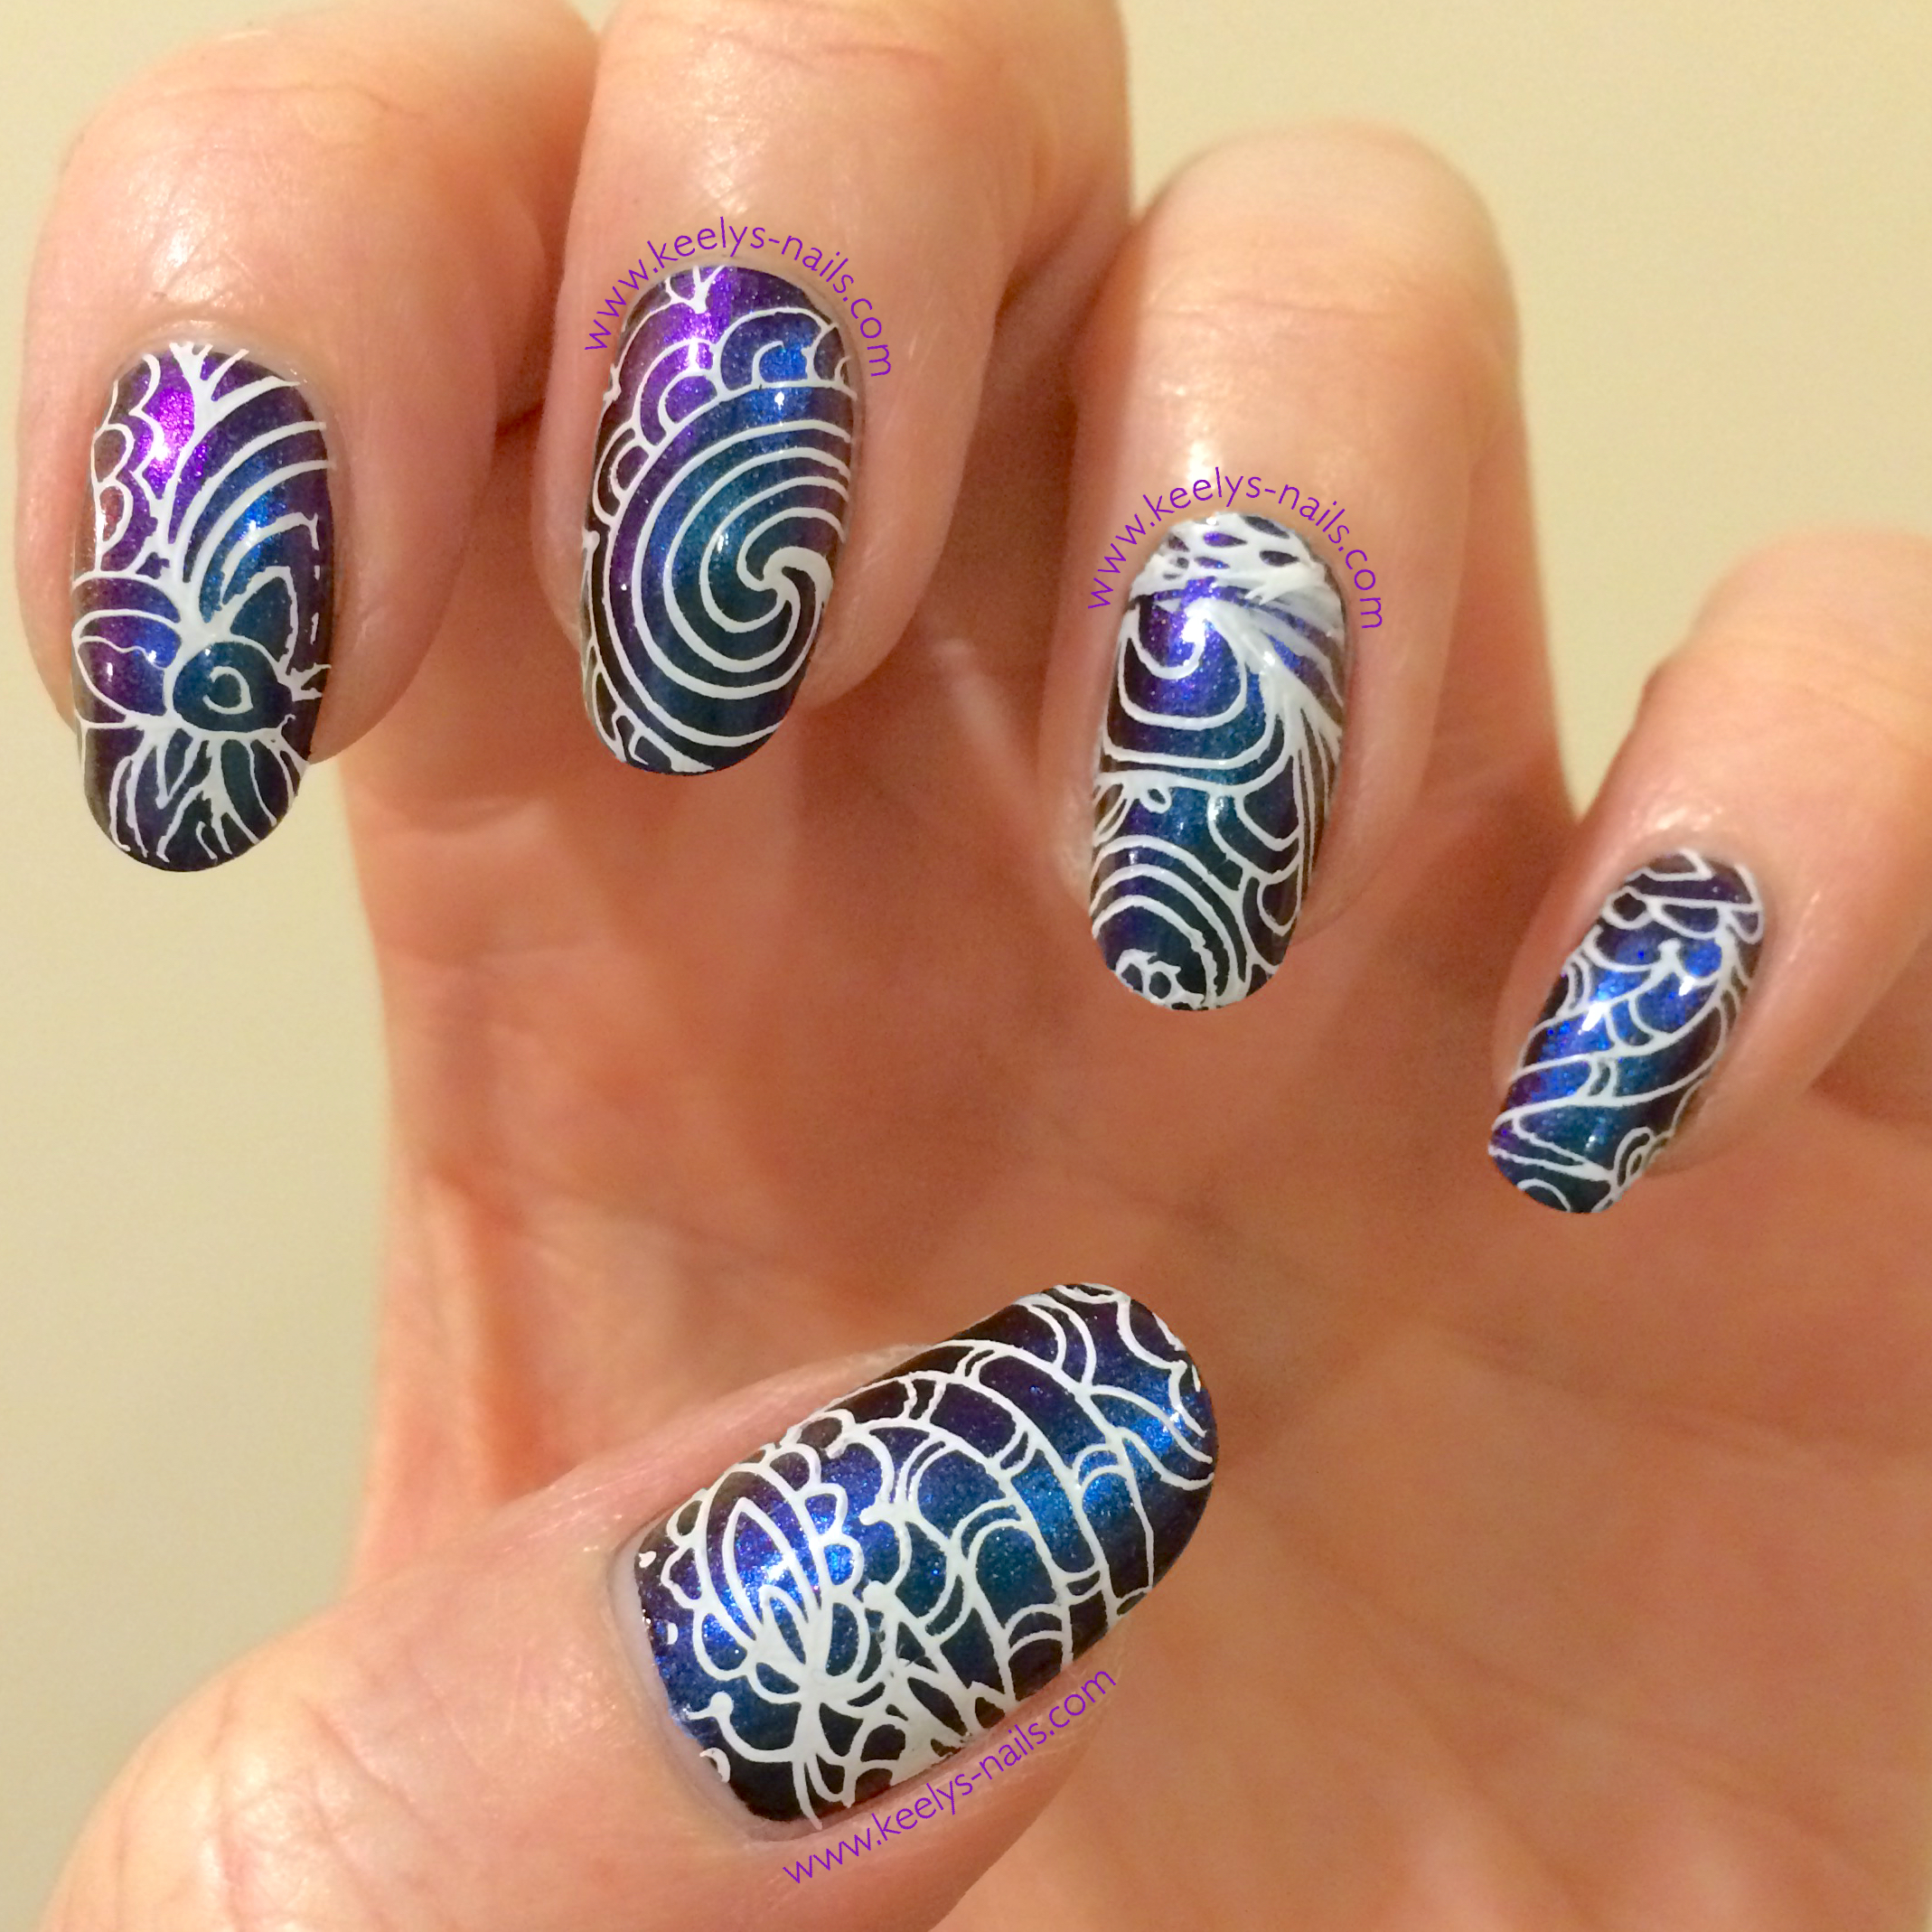 Review: Duochrome Stamping using BP-L002 from Born Pretty Store by Keely's Nails